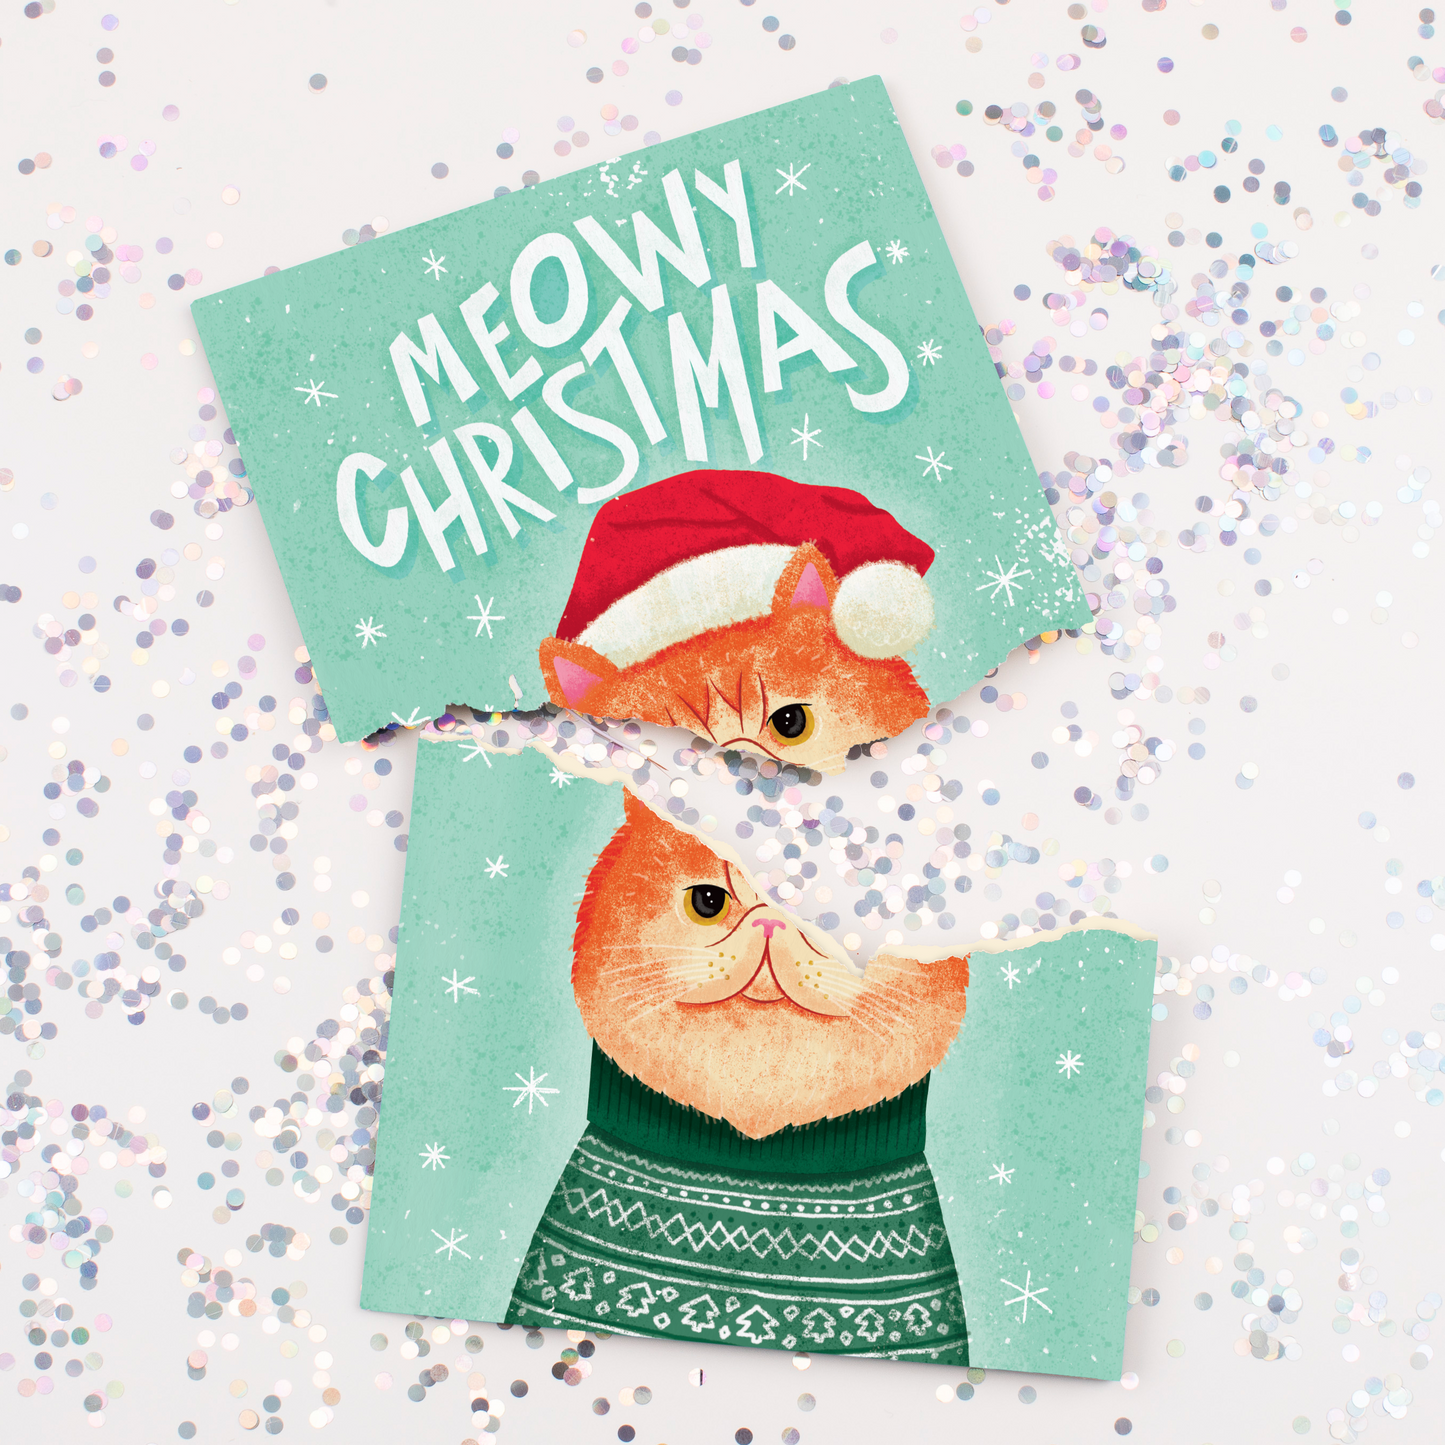 Endless Meowy Christmas With a personal message!